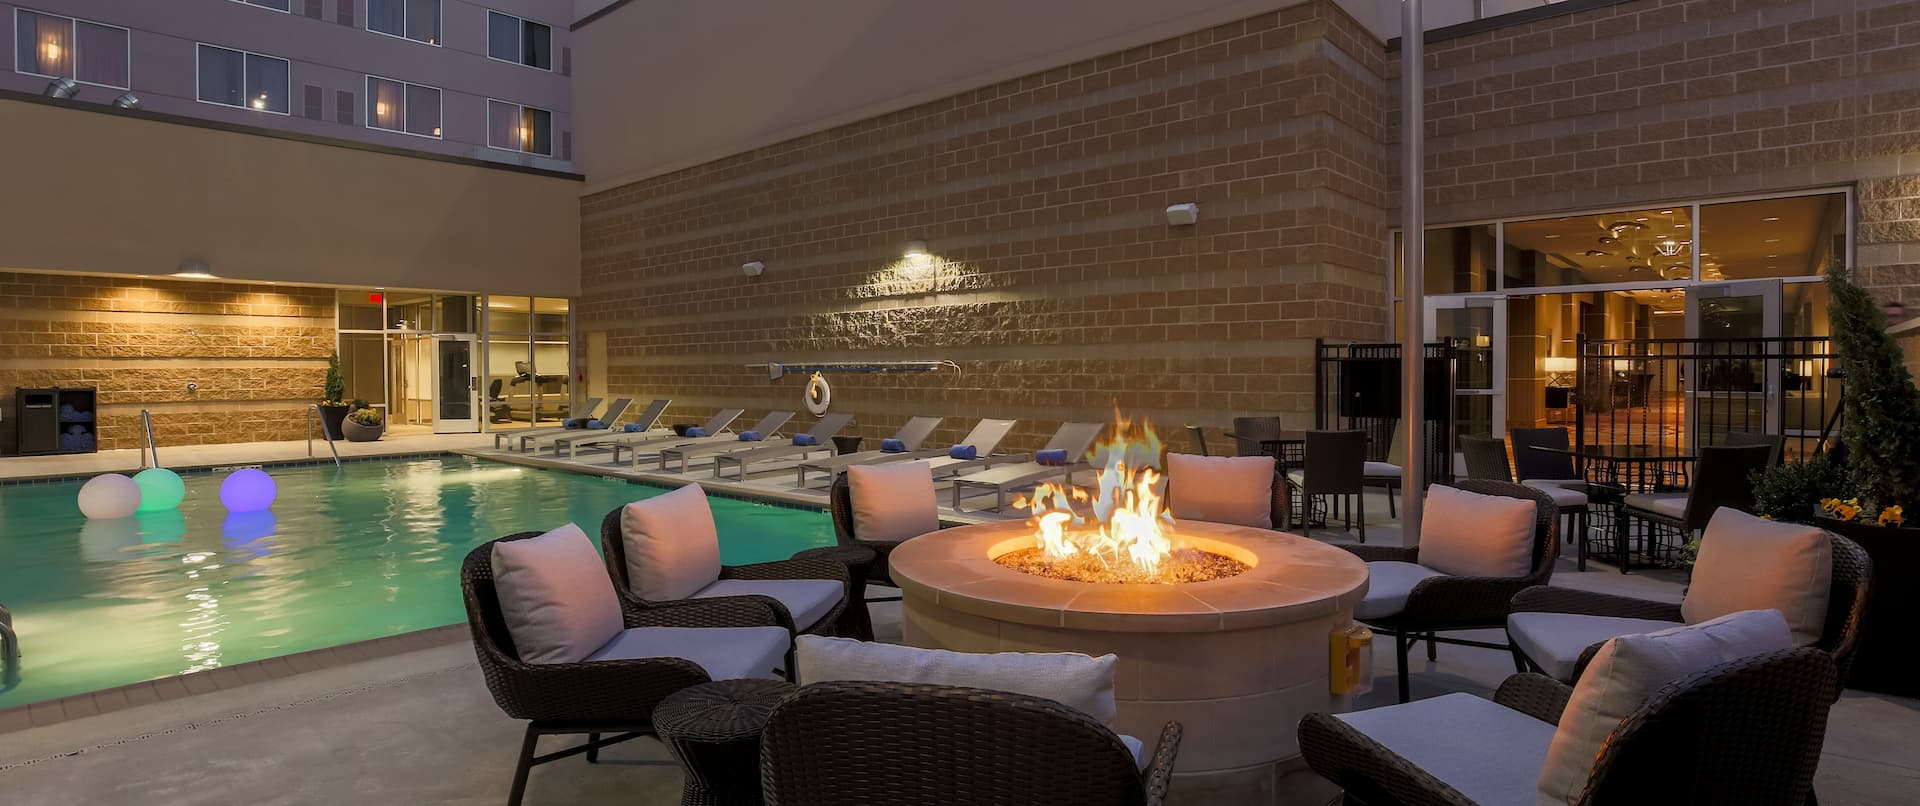 Loungers by Outdoor Pool and Soft Seating Around Fire Pit on Patio at Night